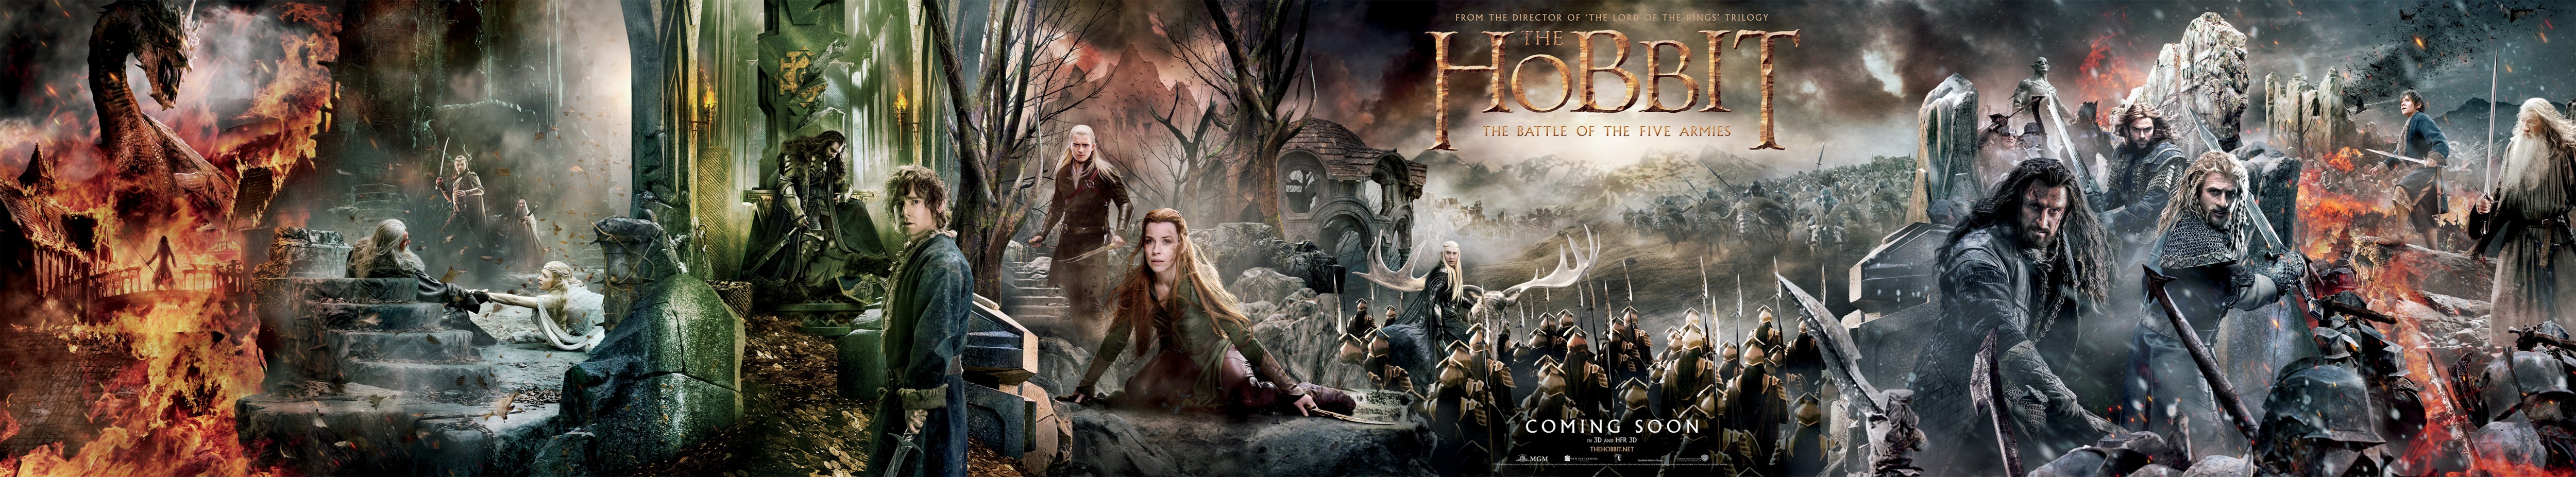 Mega Sized Movie Poster Image for The Hobbit: The Battle of the Five Armies (#3 of 28)